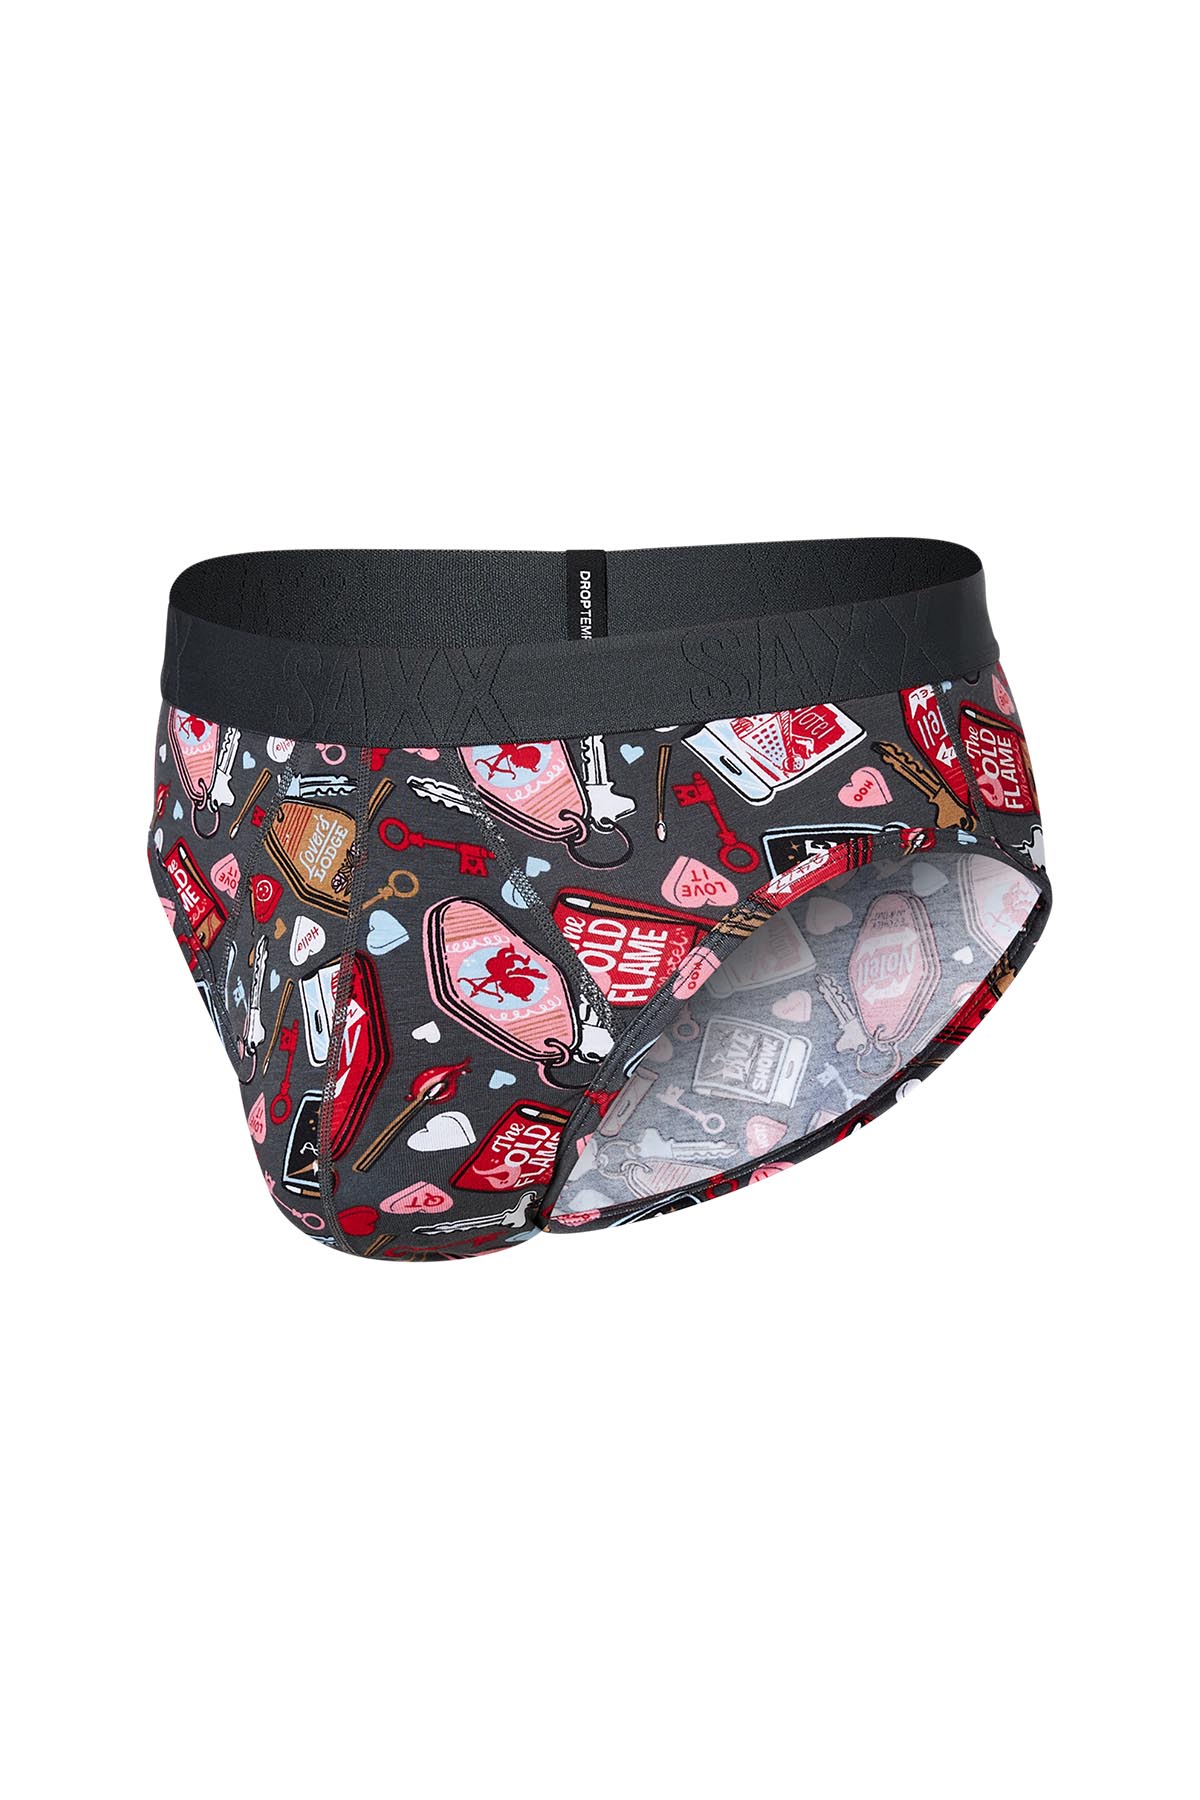 https://cdn11.bigcommerce.com/s-6ehfk/images/stencil/original/products/12667/36875/Saxx-DropTemp-Cooling-Cotton-Brief-No-Tell-Motel-Graphite-SXBR44-NTG-1__53556.1709245693.jpg?c=2?c=2&imbypass=on&imbypass=on